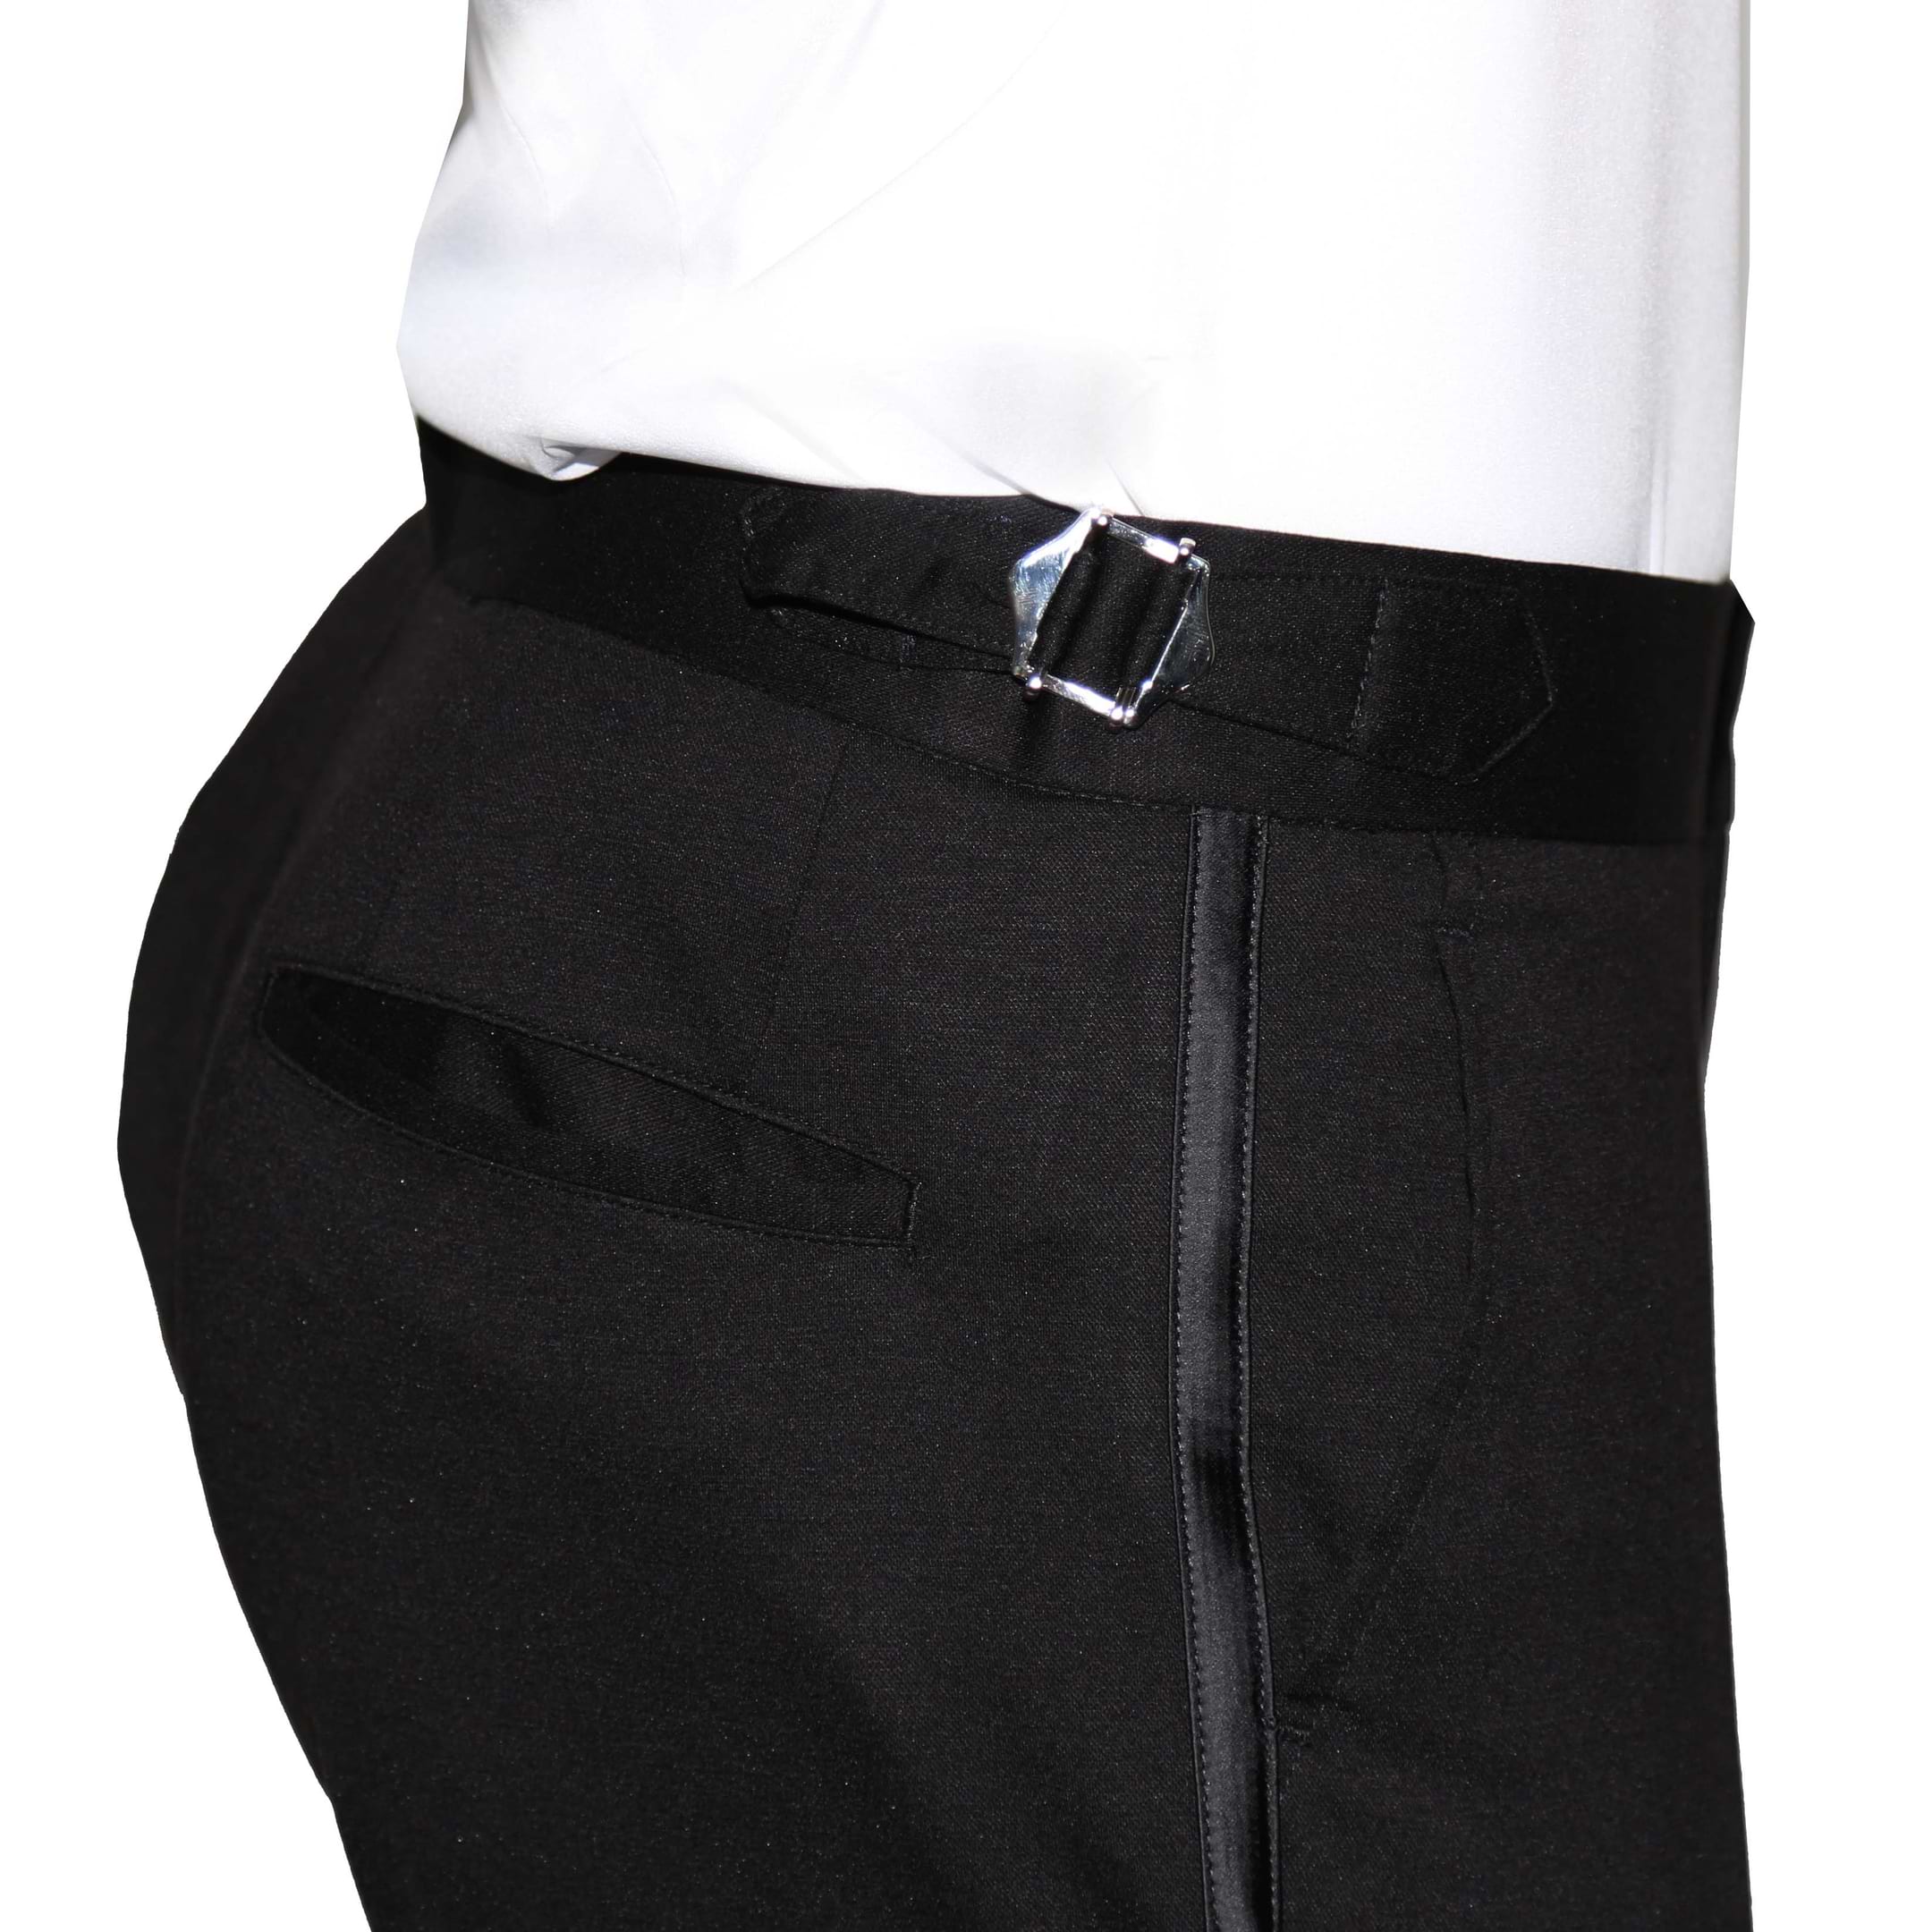 Buy Black Tapered Leg Trousers With Stretch - 24R, Trousers